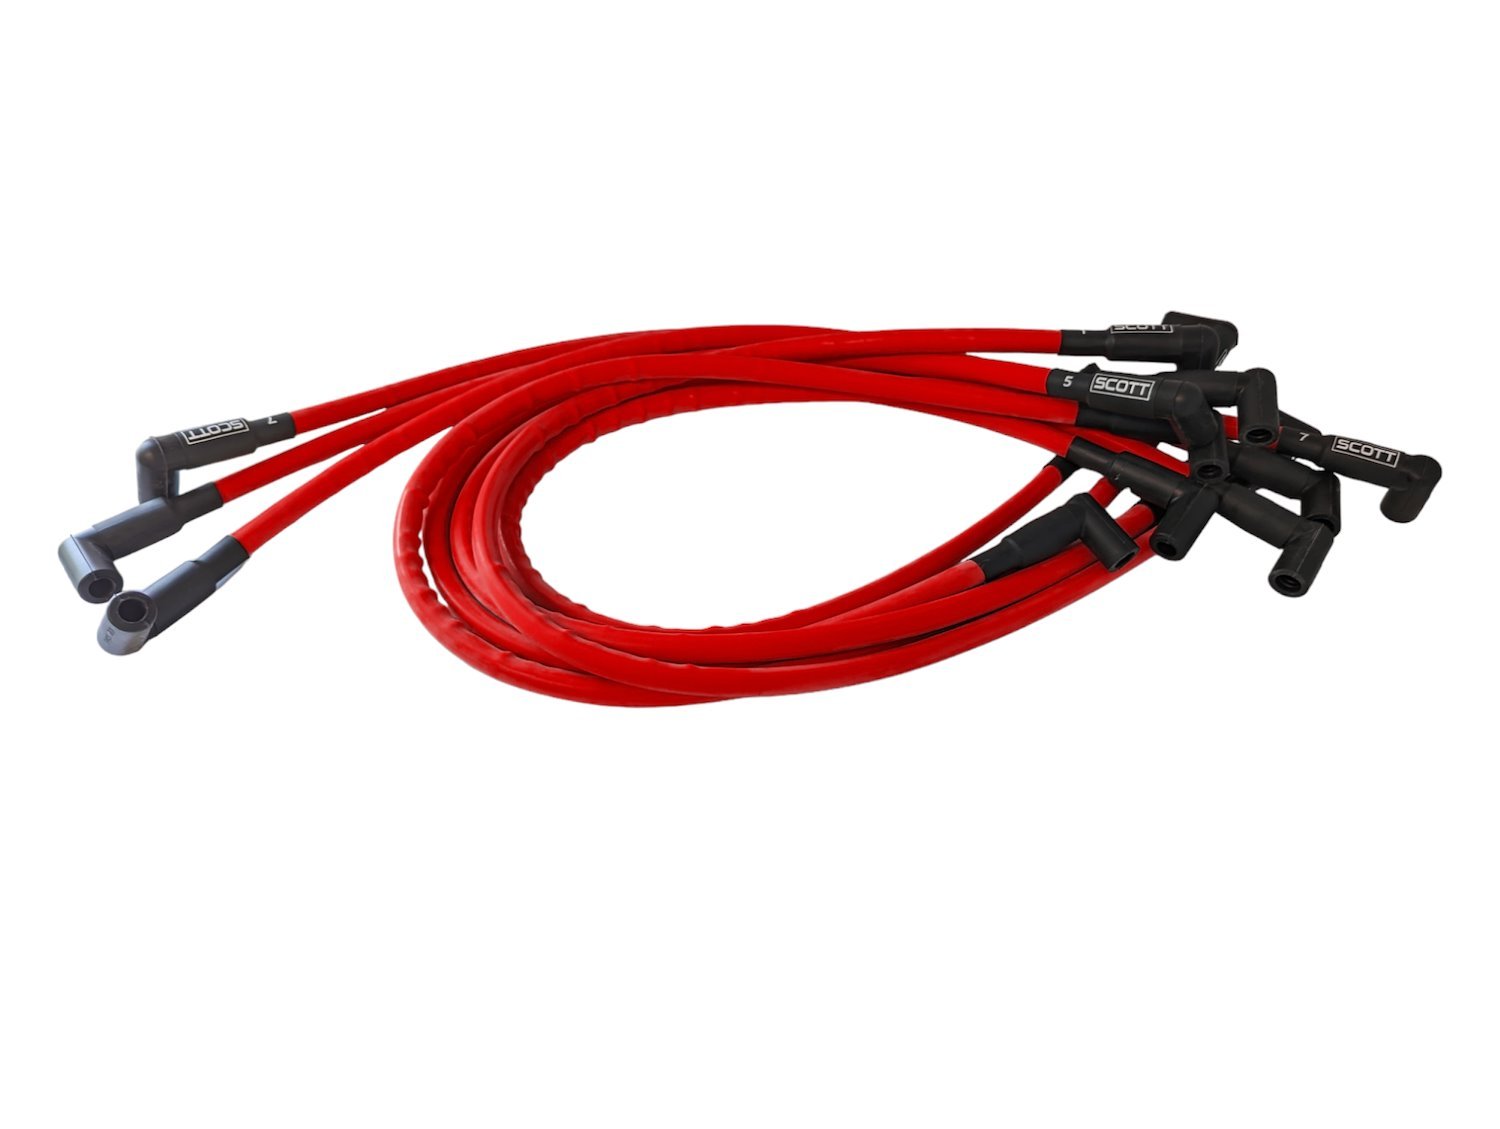 SPW300-CH-604-2 Super Mag Fiberglass-Oversleeved Spark Plug Wire Set for Small Block Chevy 604 Crate, Under Header [Red]